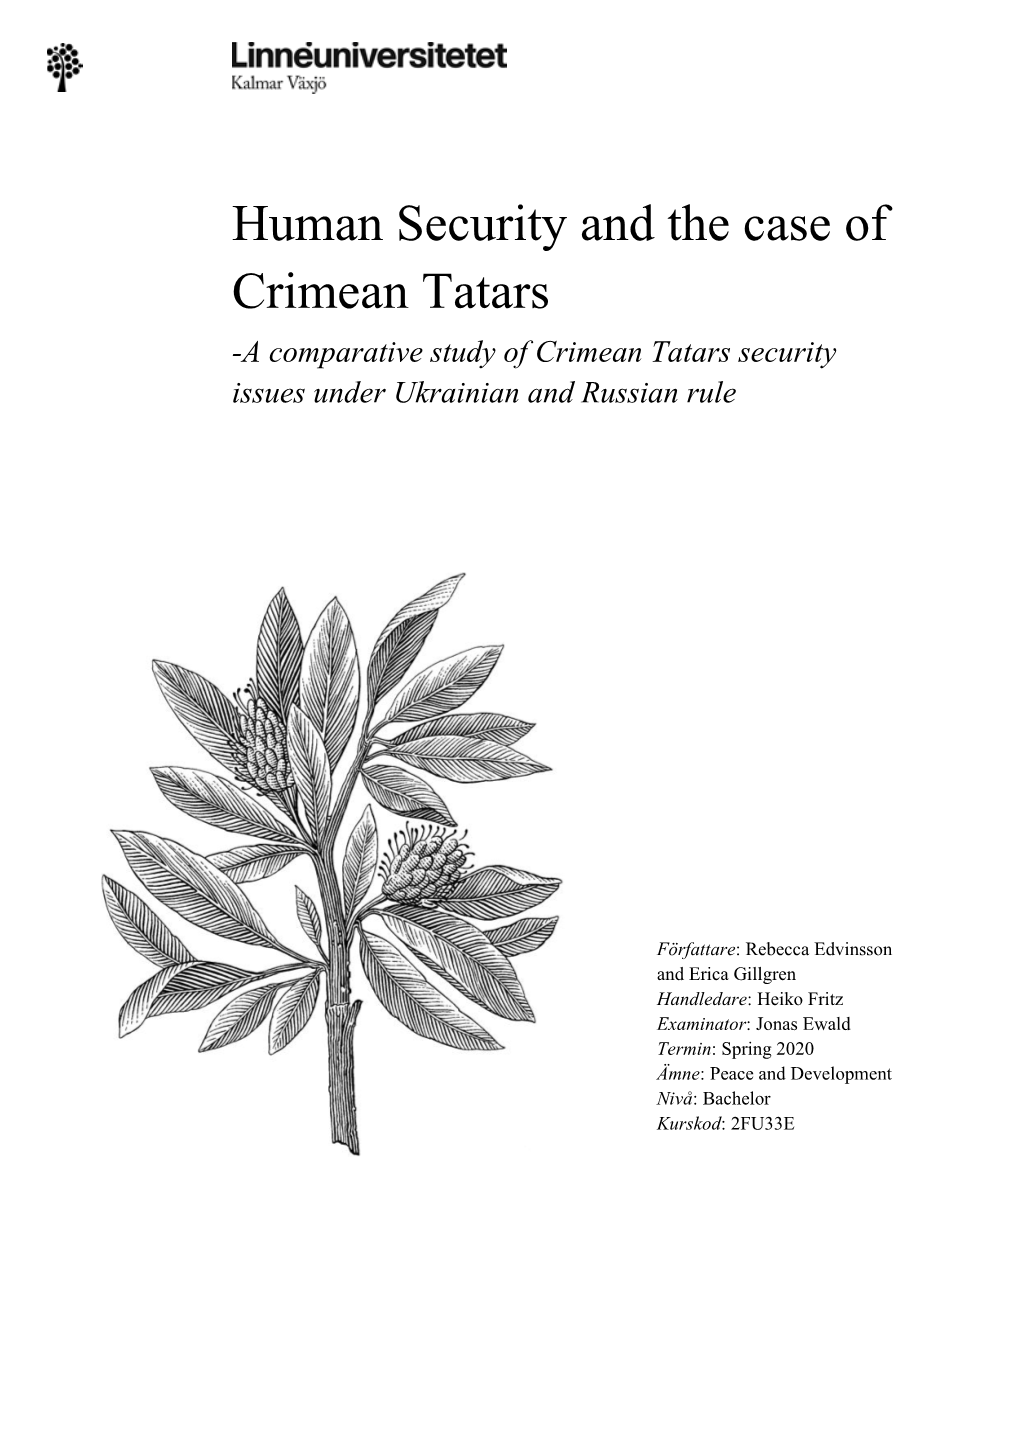 Human Security and the Case of Crimean Tatars -A Comparative Study of Crimean Tatars Security Issues Under Ukrainian and Russian Rule